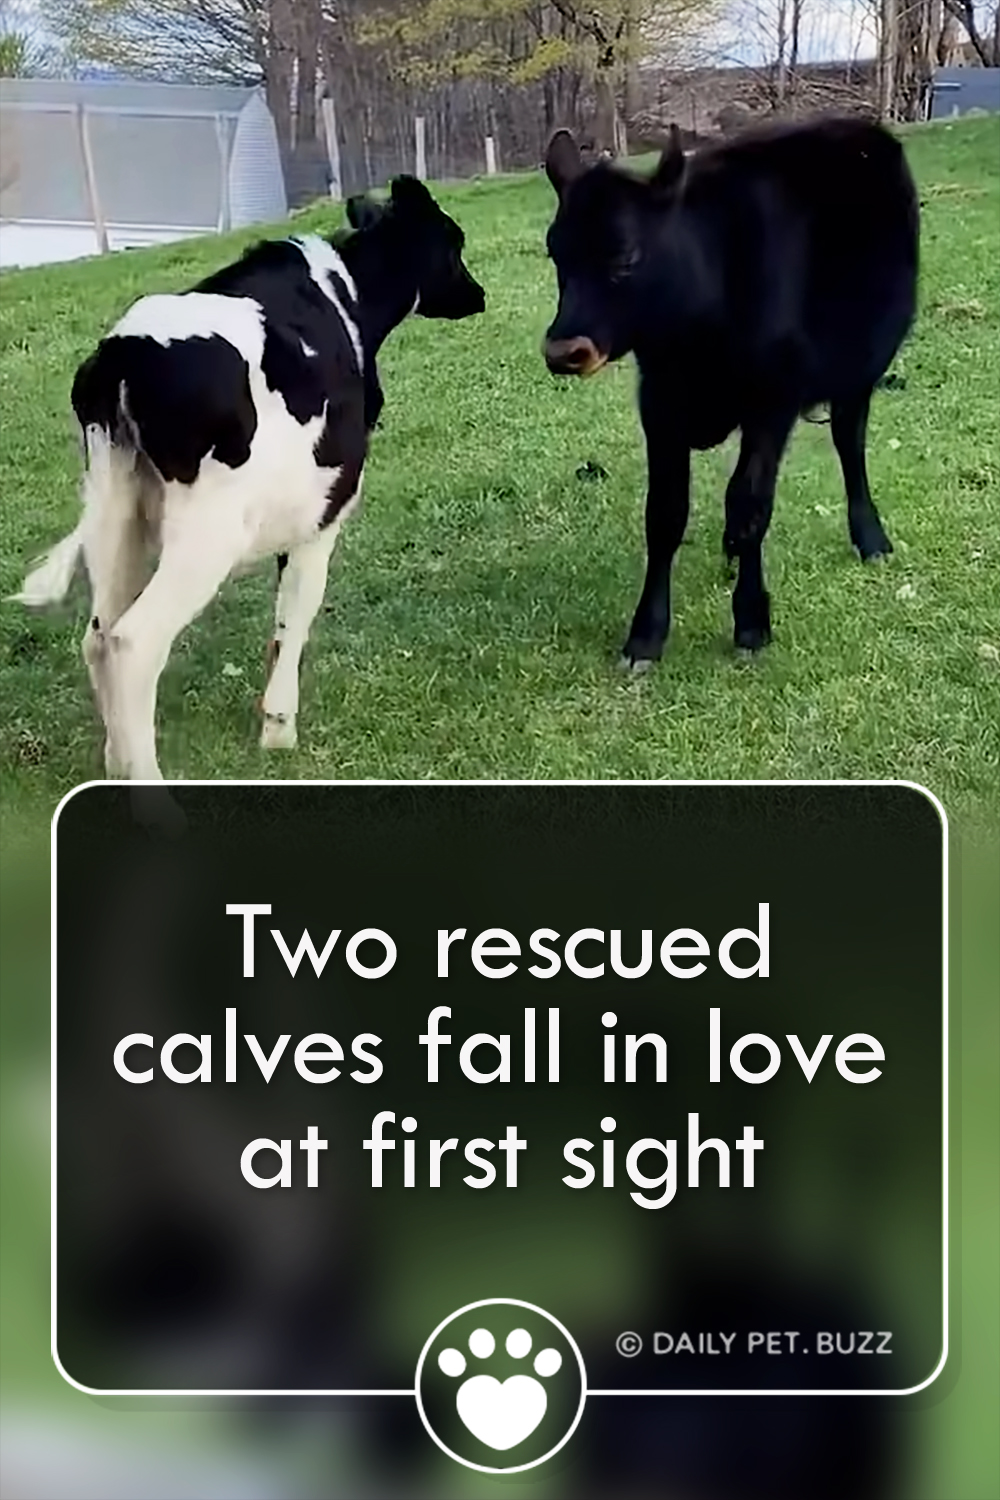 Two rescued calves fall in love at first sight